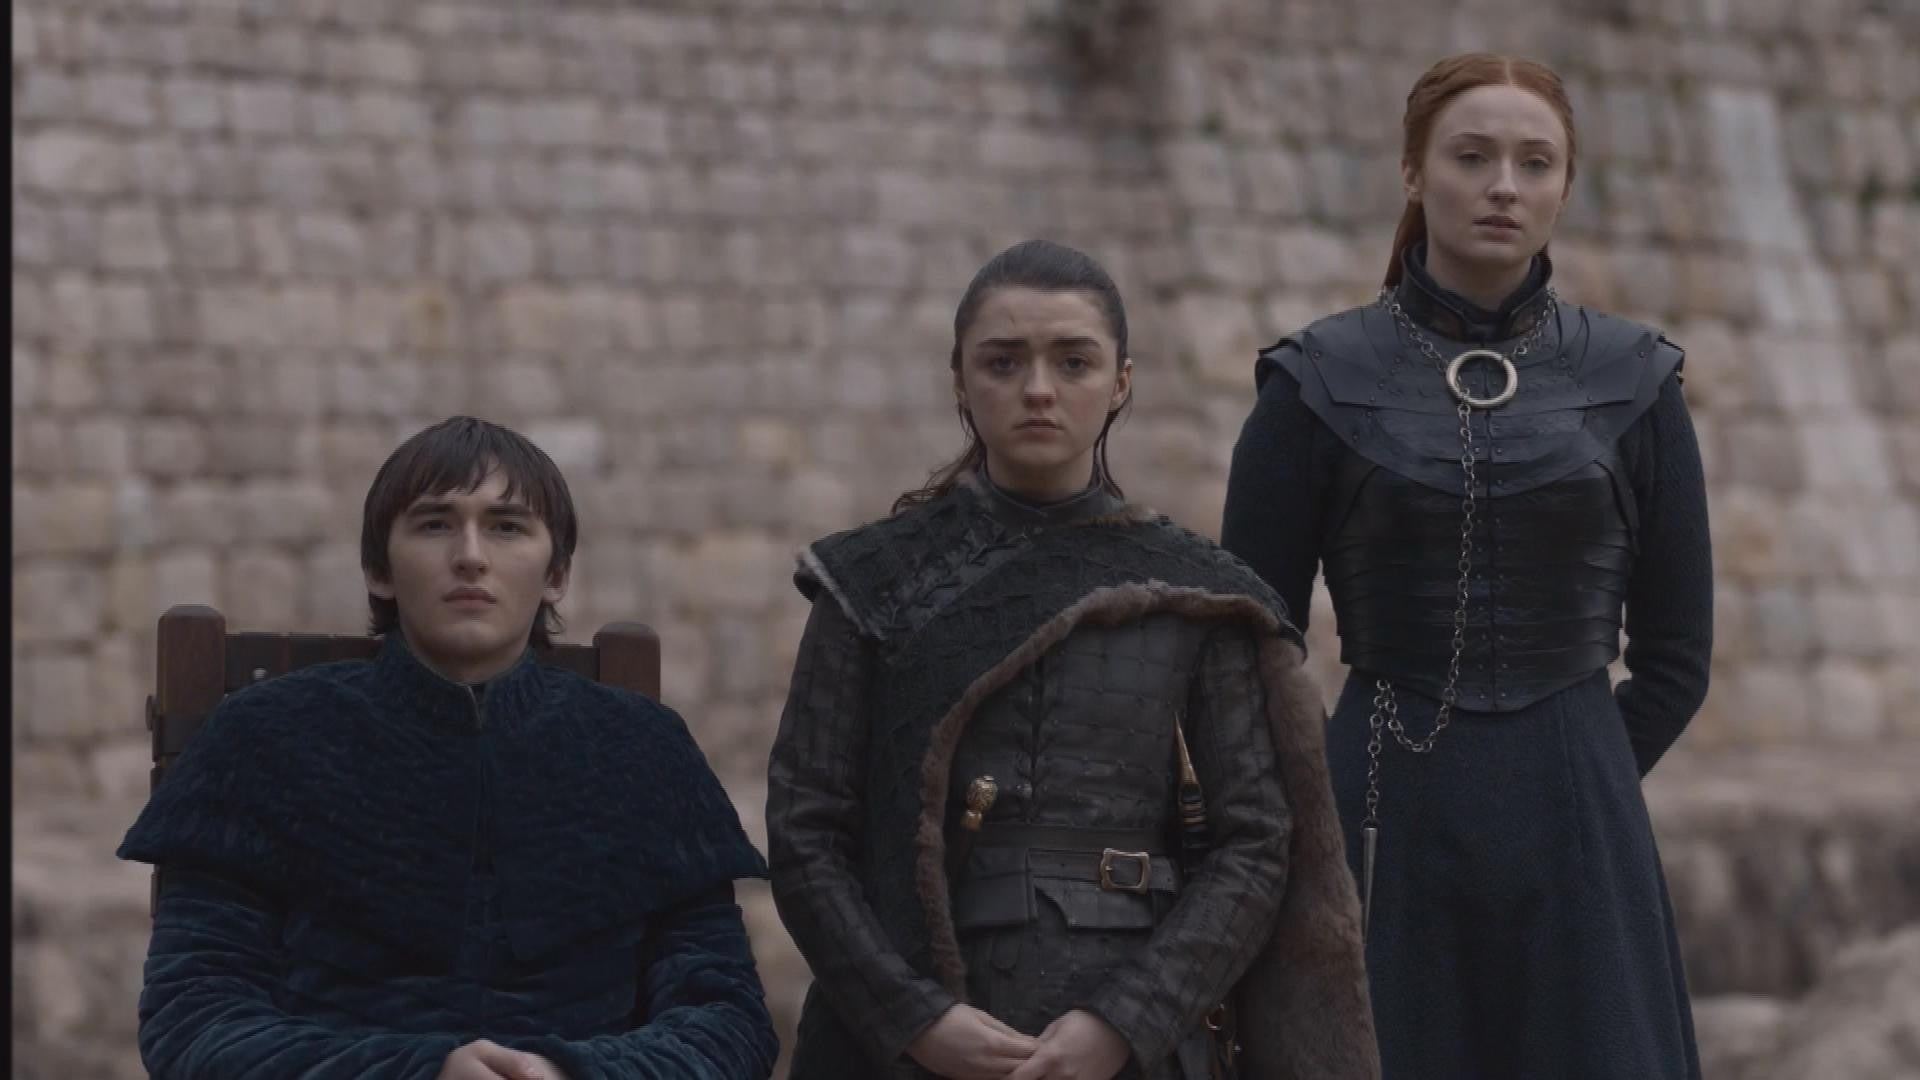 The Game Of Thrones Series Finale Had Another Coffee Cup Moment